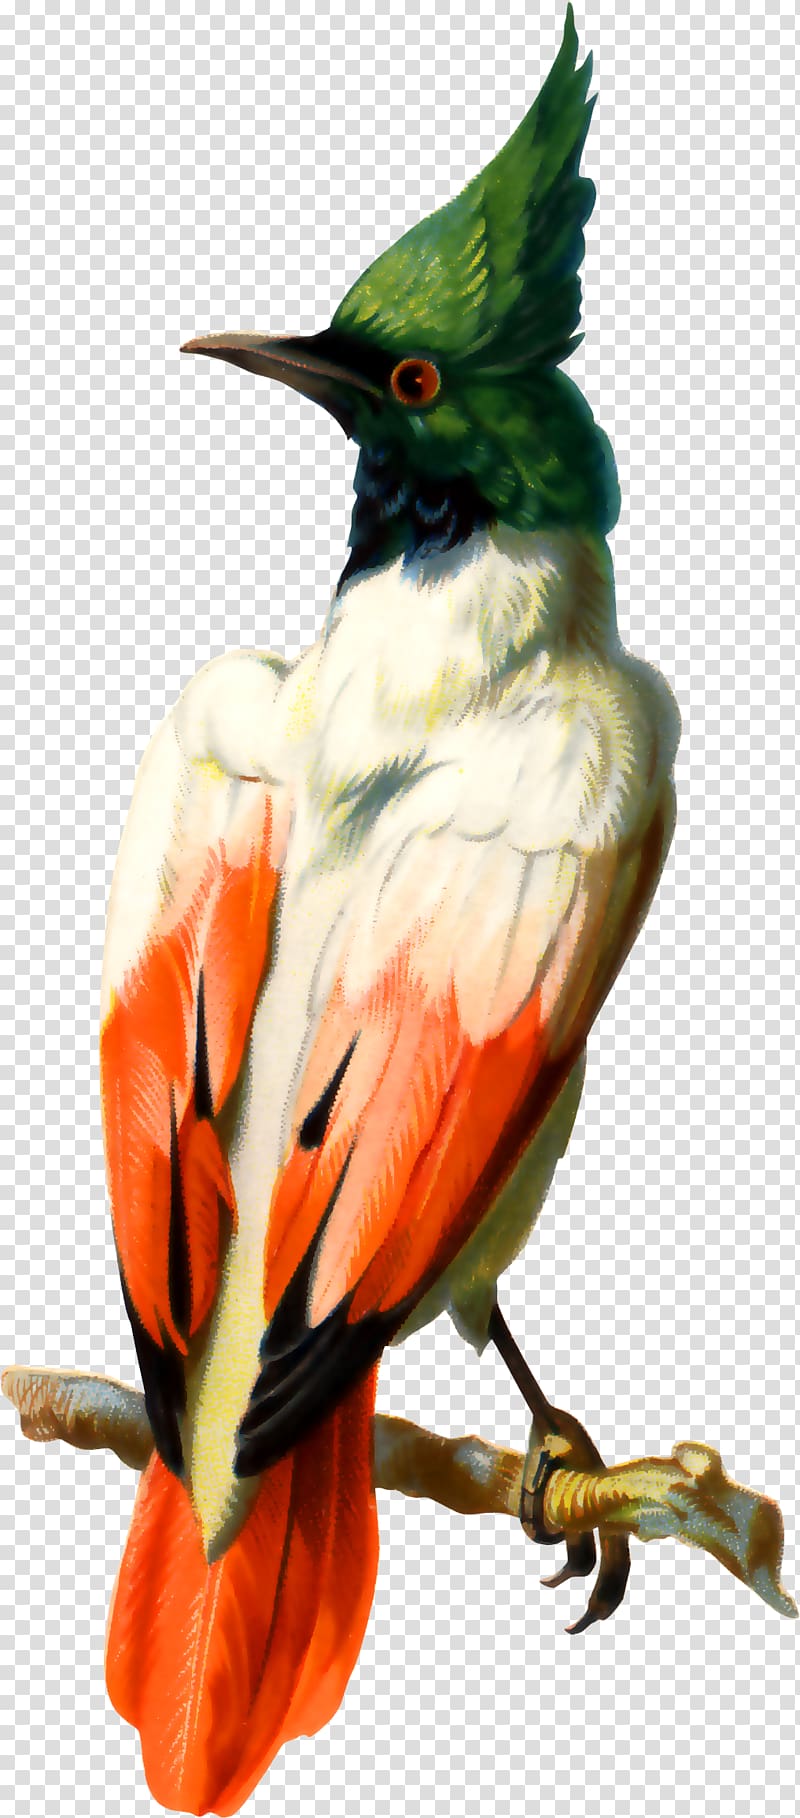 Bird Illustration, Hand-painted parrot transparent background PNG clipart